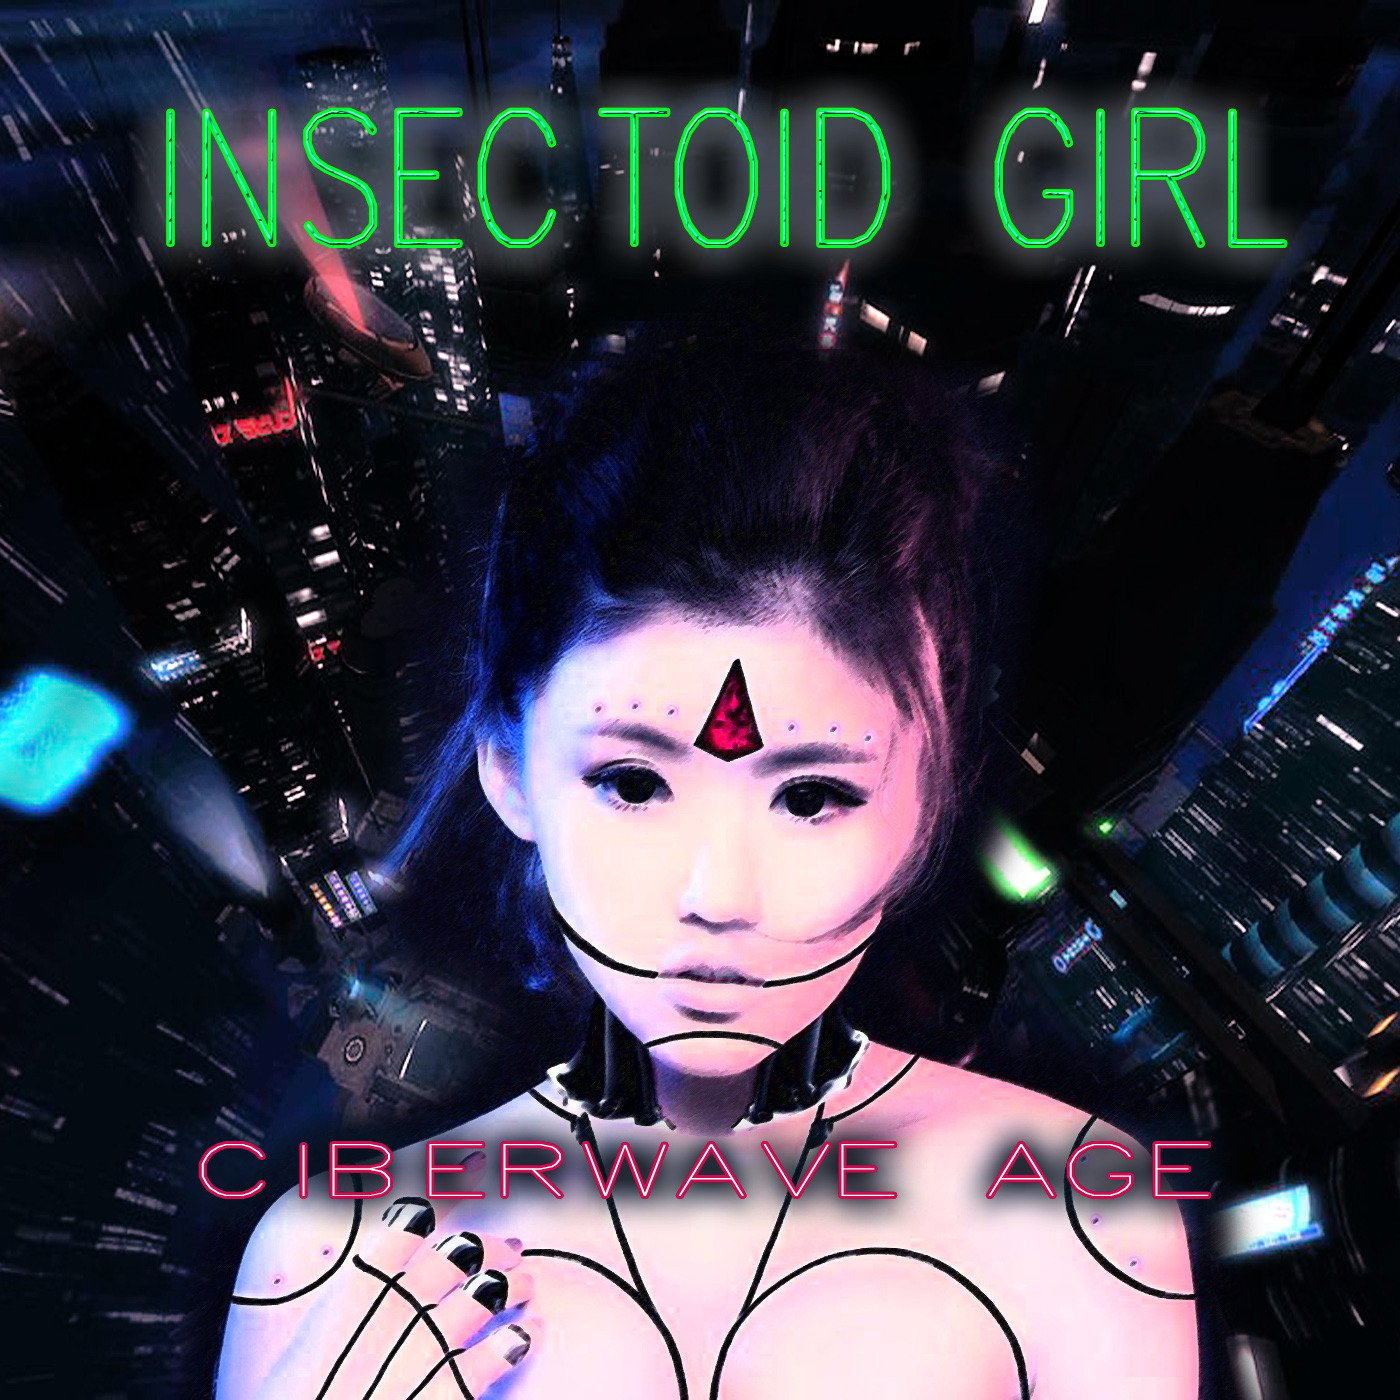 Insectoid Girl - 01 - Cyberwave Age